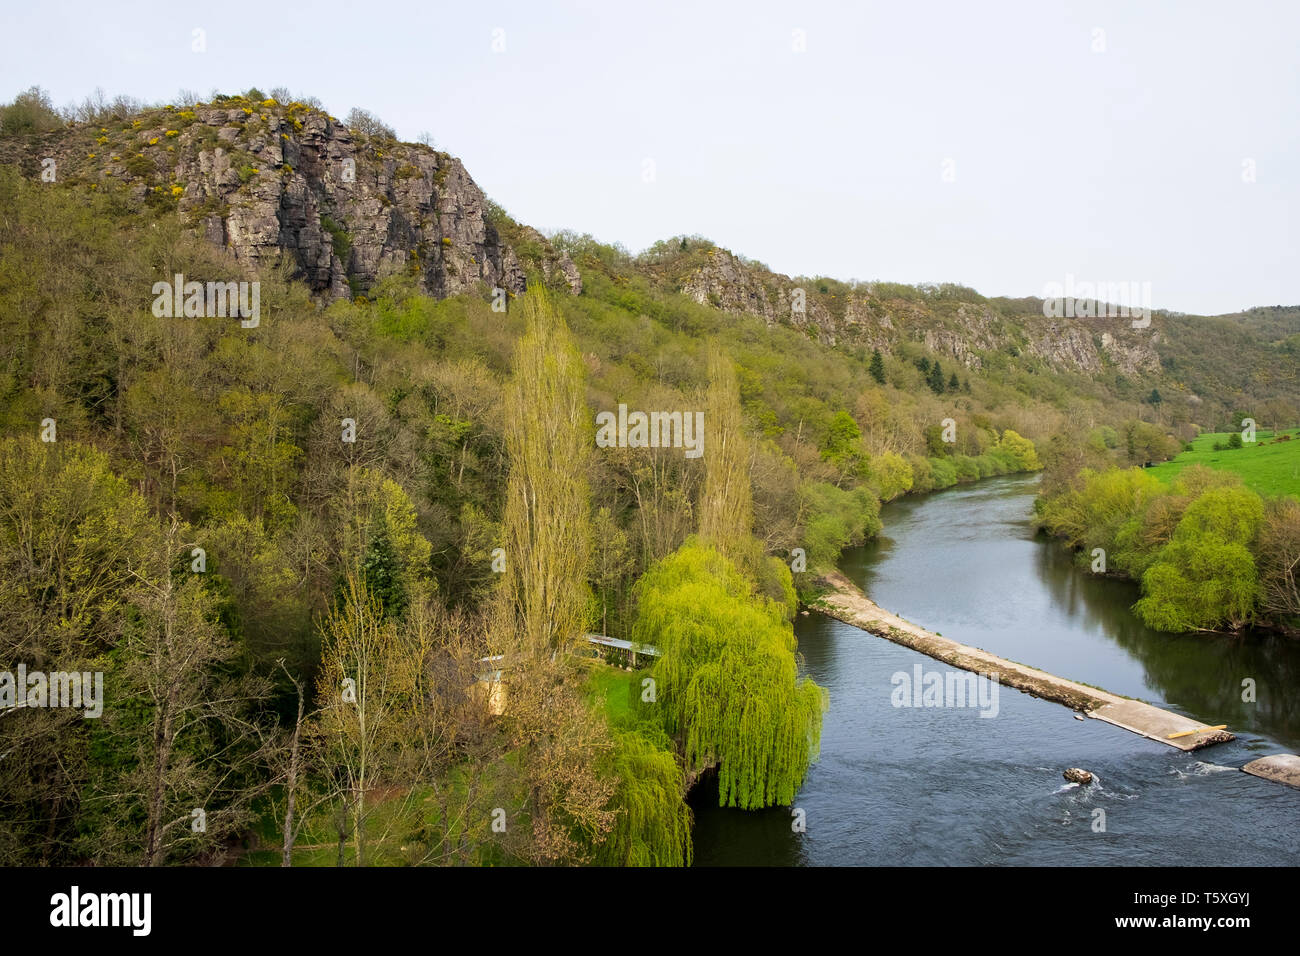 The River Orne at Clecy and the rocky outcrops of Rochers de Parcs, Suisse Normande, Normandy Stock Photo